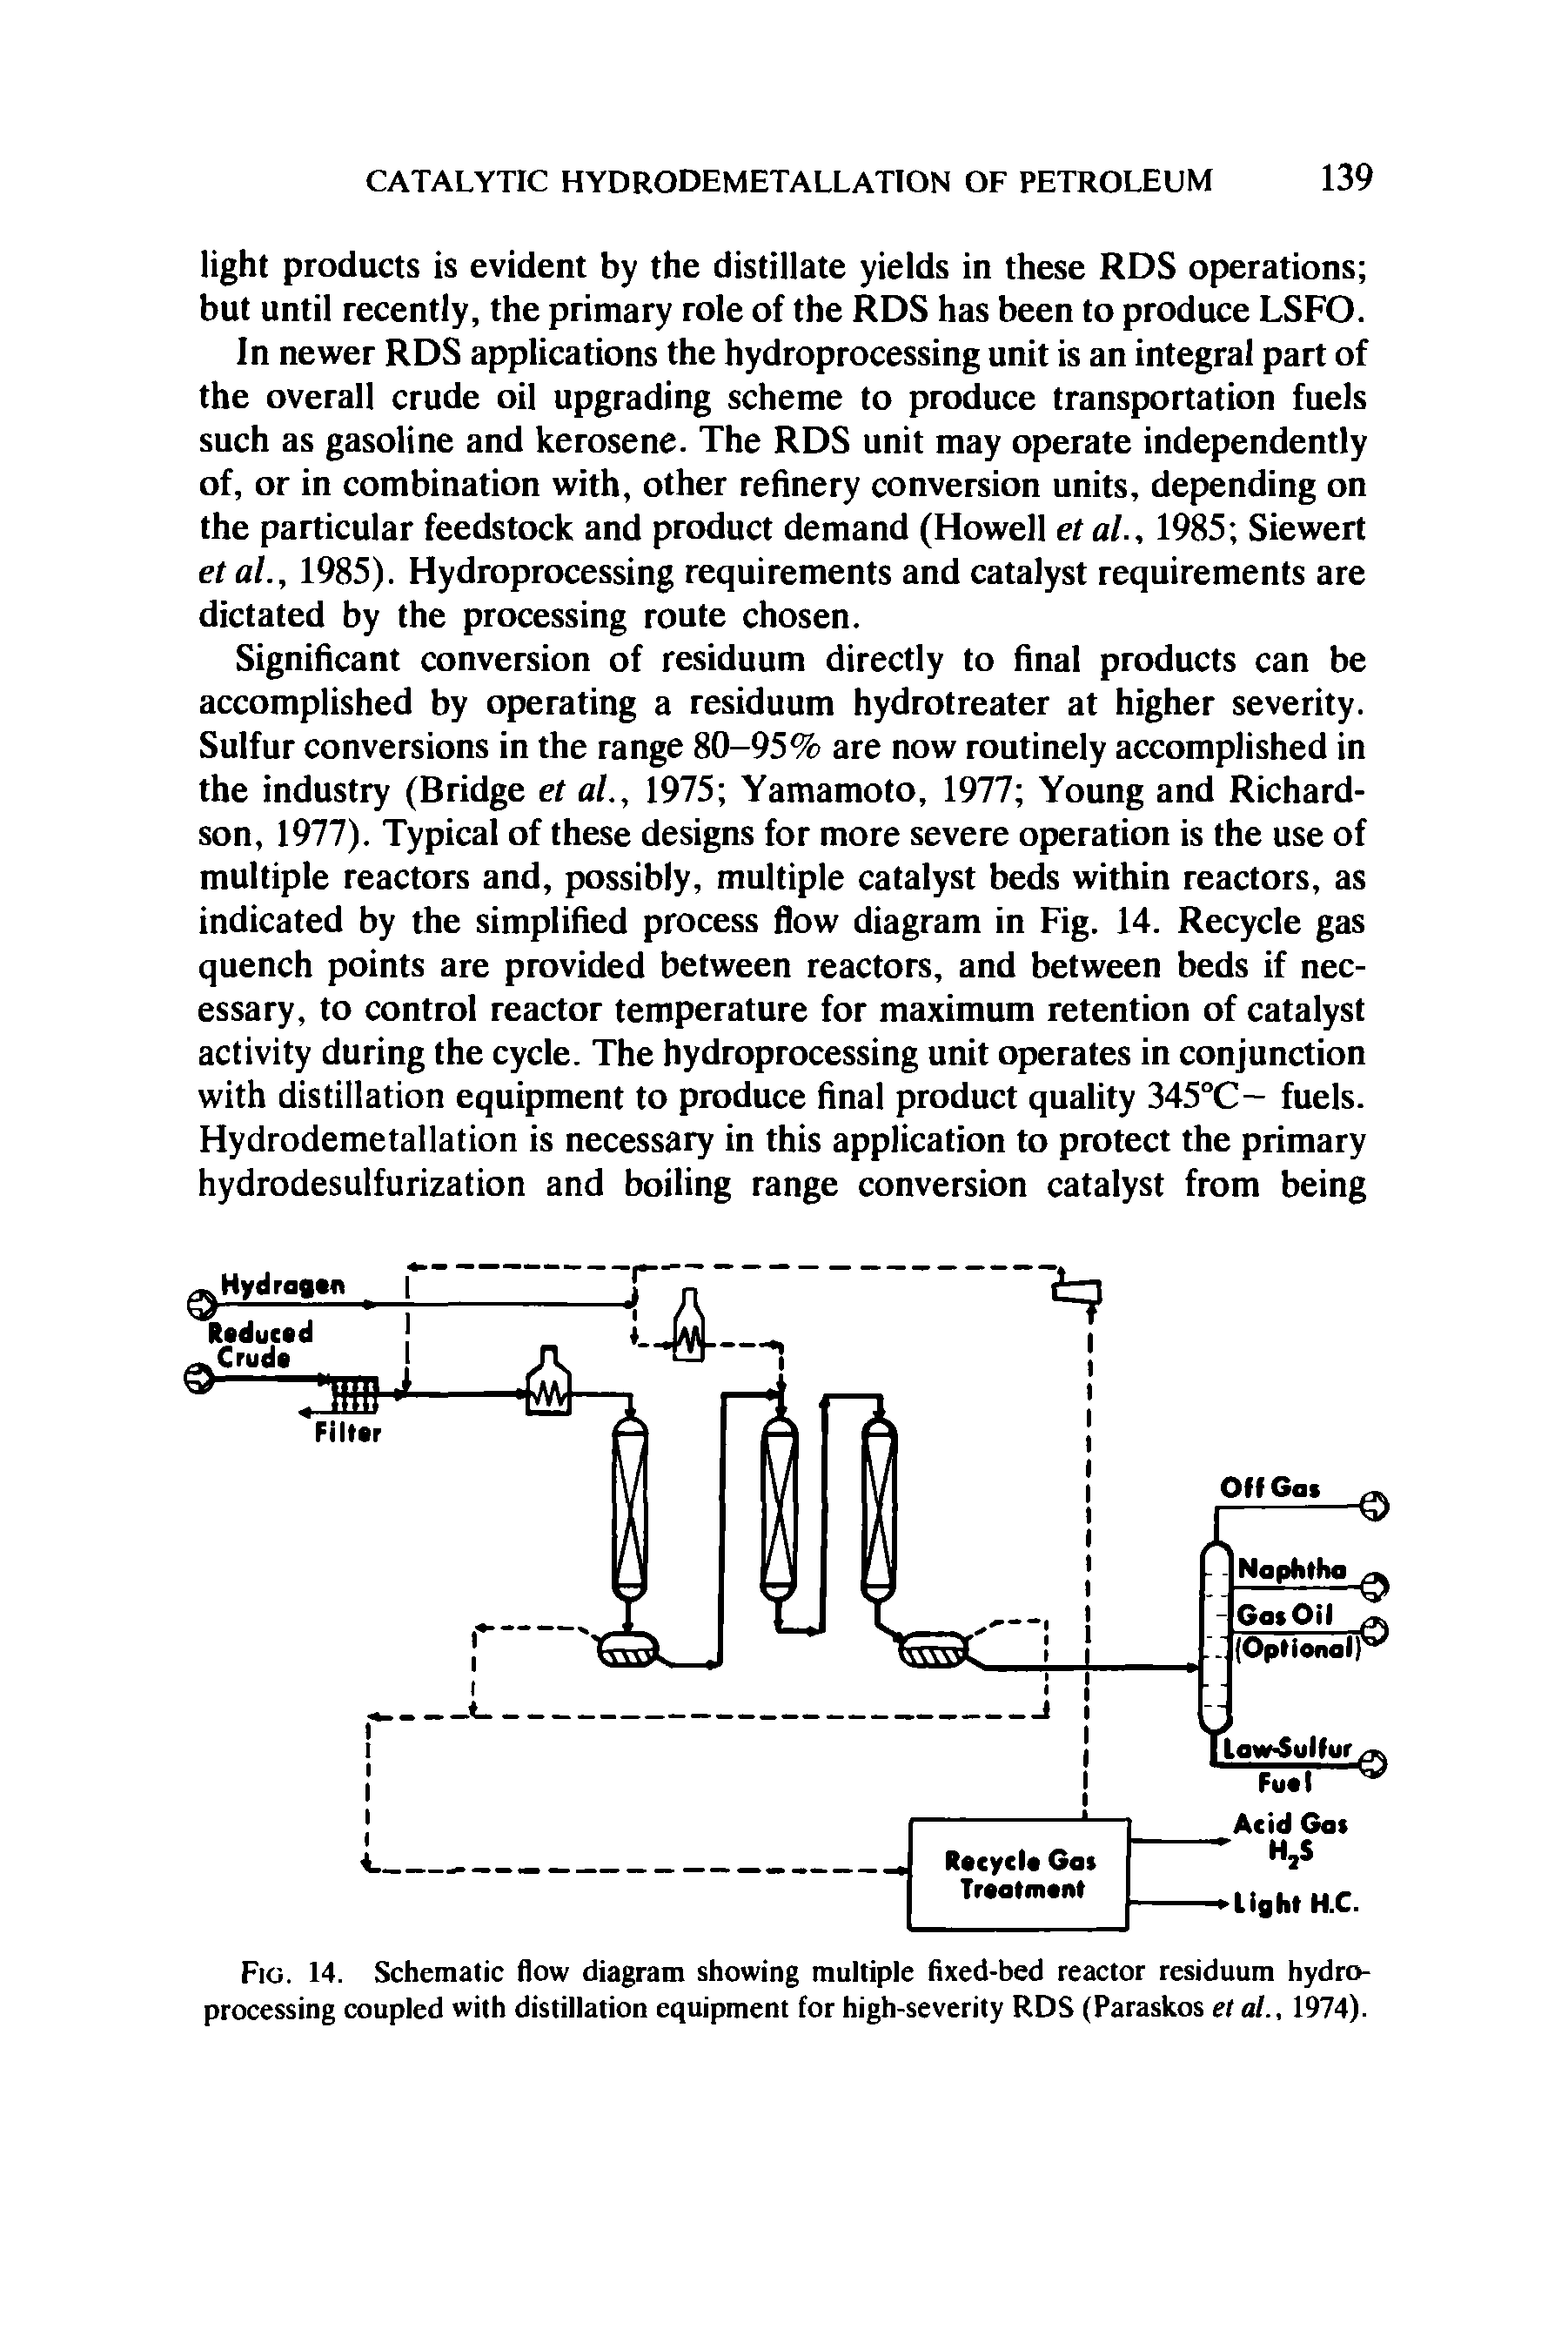 Fig. 14. Schematic flow diagram showing multiple fixed-bed reactor residuum hydroprocessing coupled with distillation equipment for high-severity RDS (Paraskos et al., 1974).